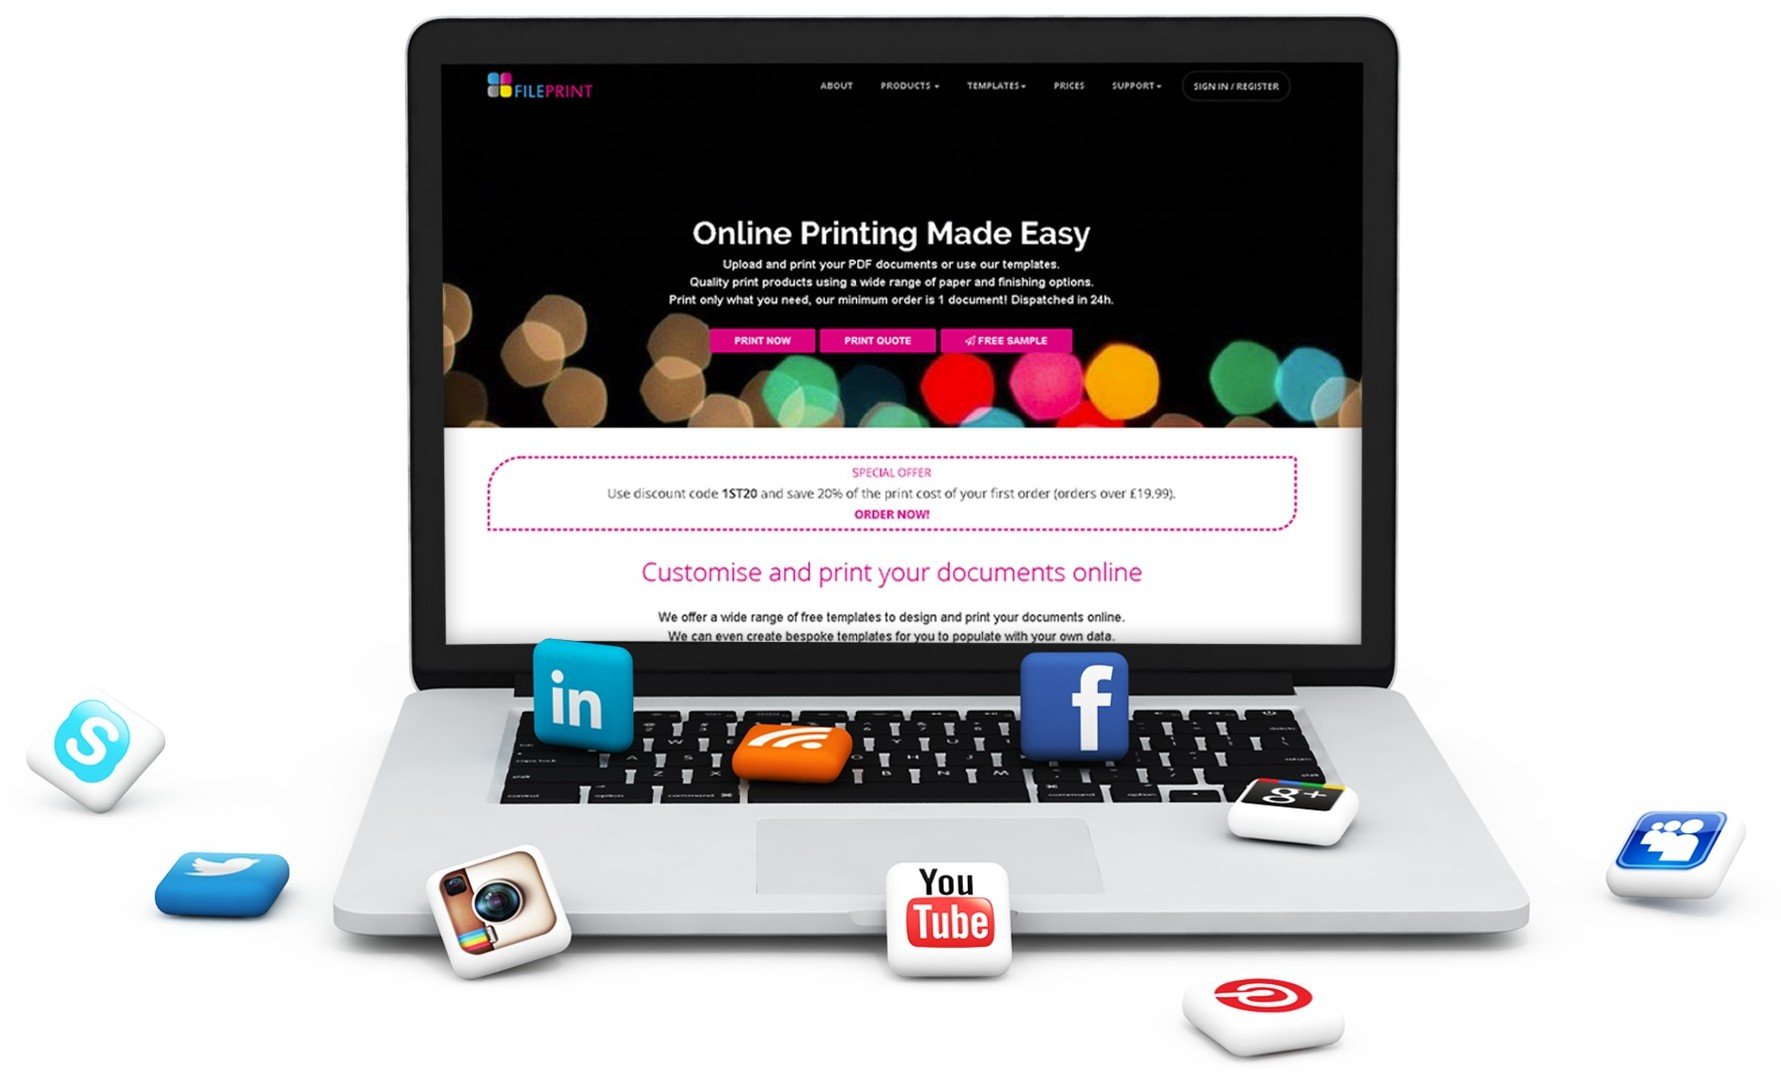 This article will help you to understand the benefits of the web to print digital marketing for your business.